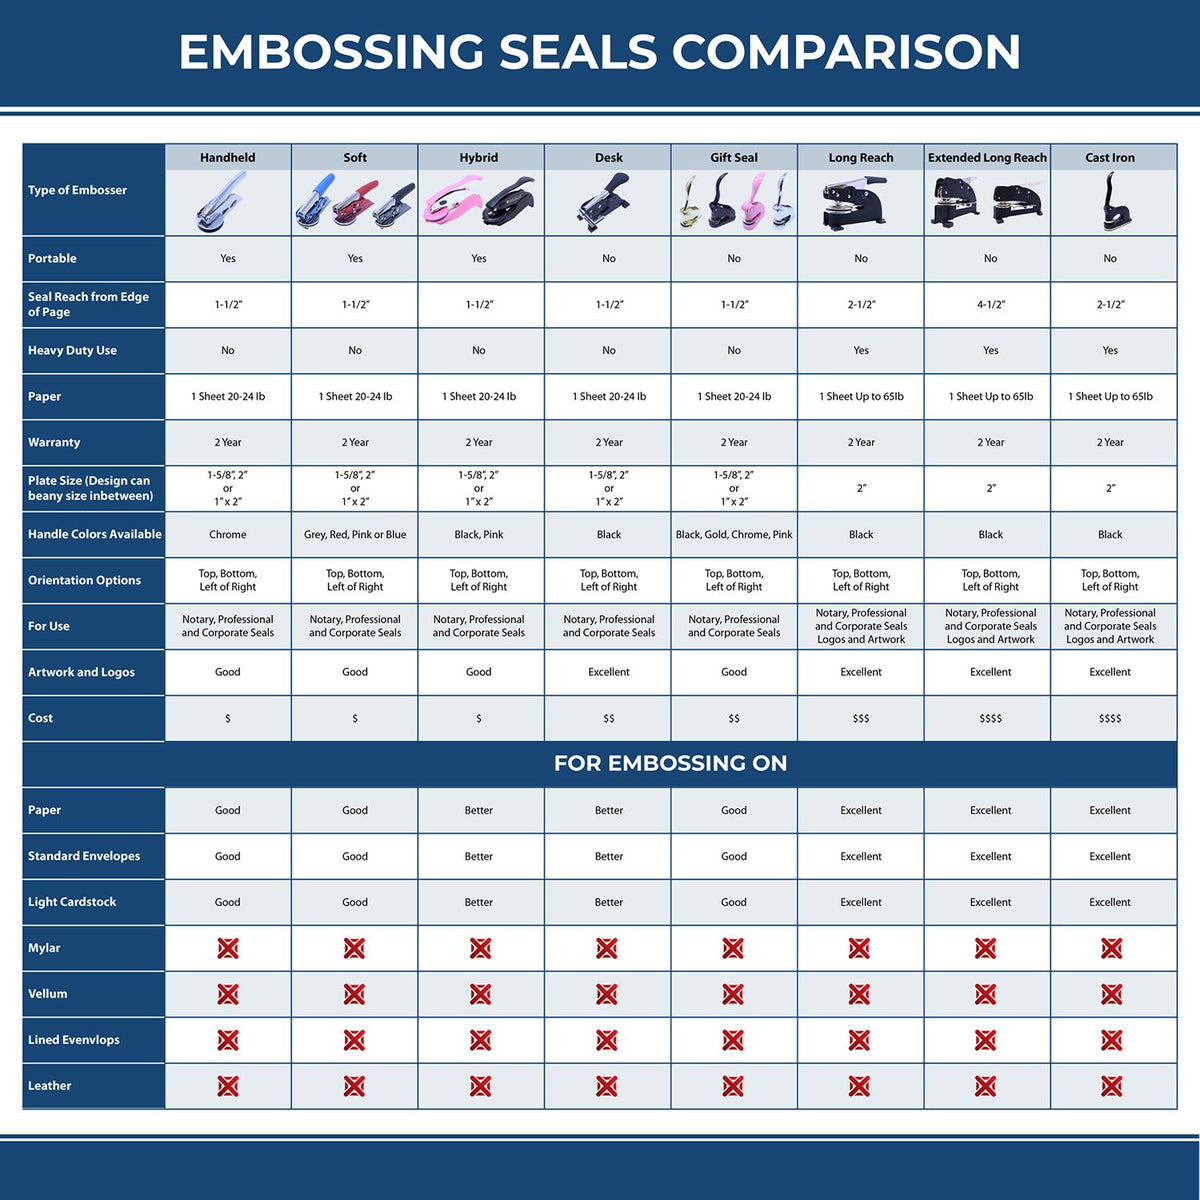 A comparison chart for the different types of mount models available for the Soft Rhode Island Professional Engineer Seal.